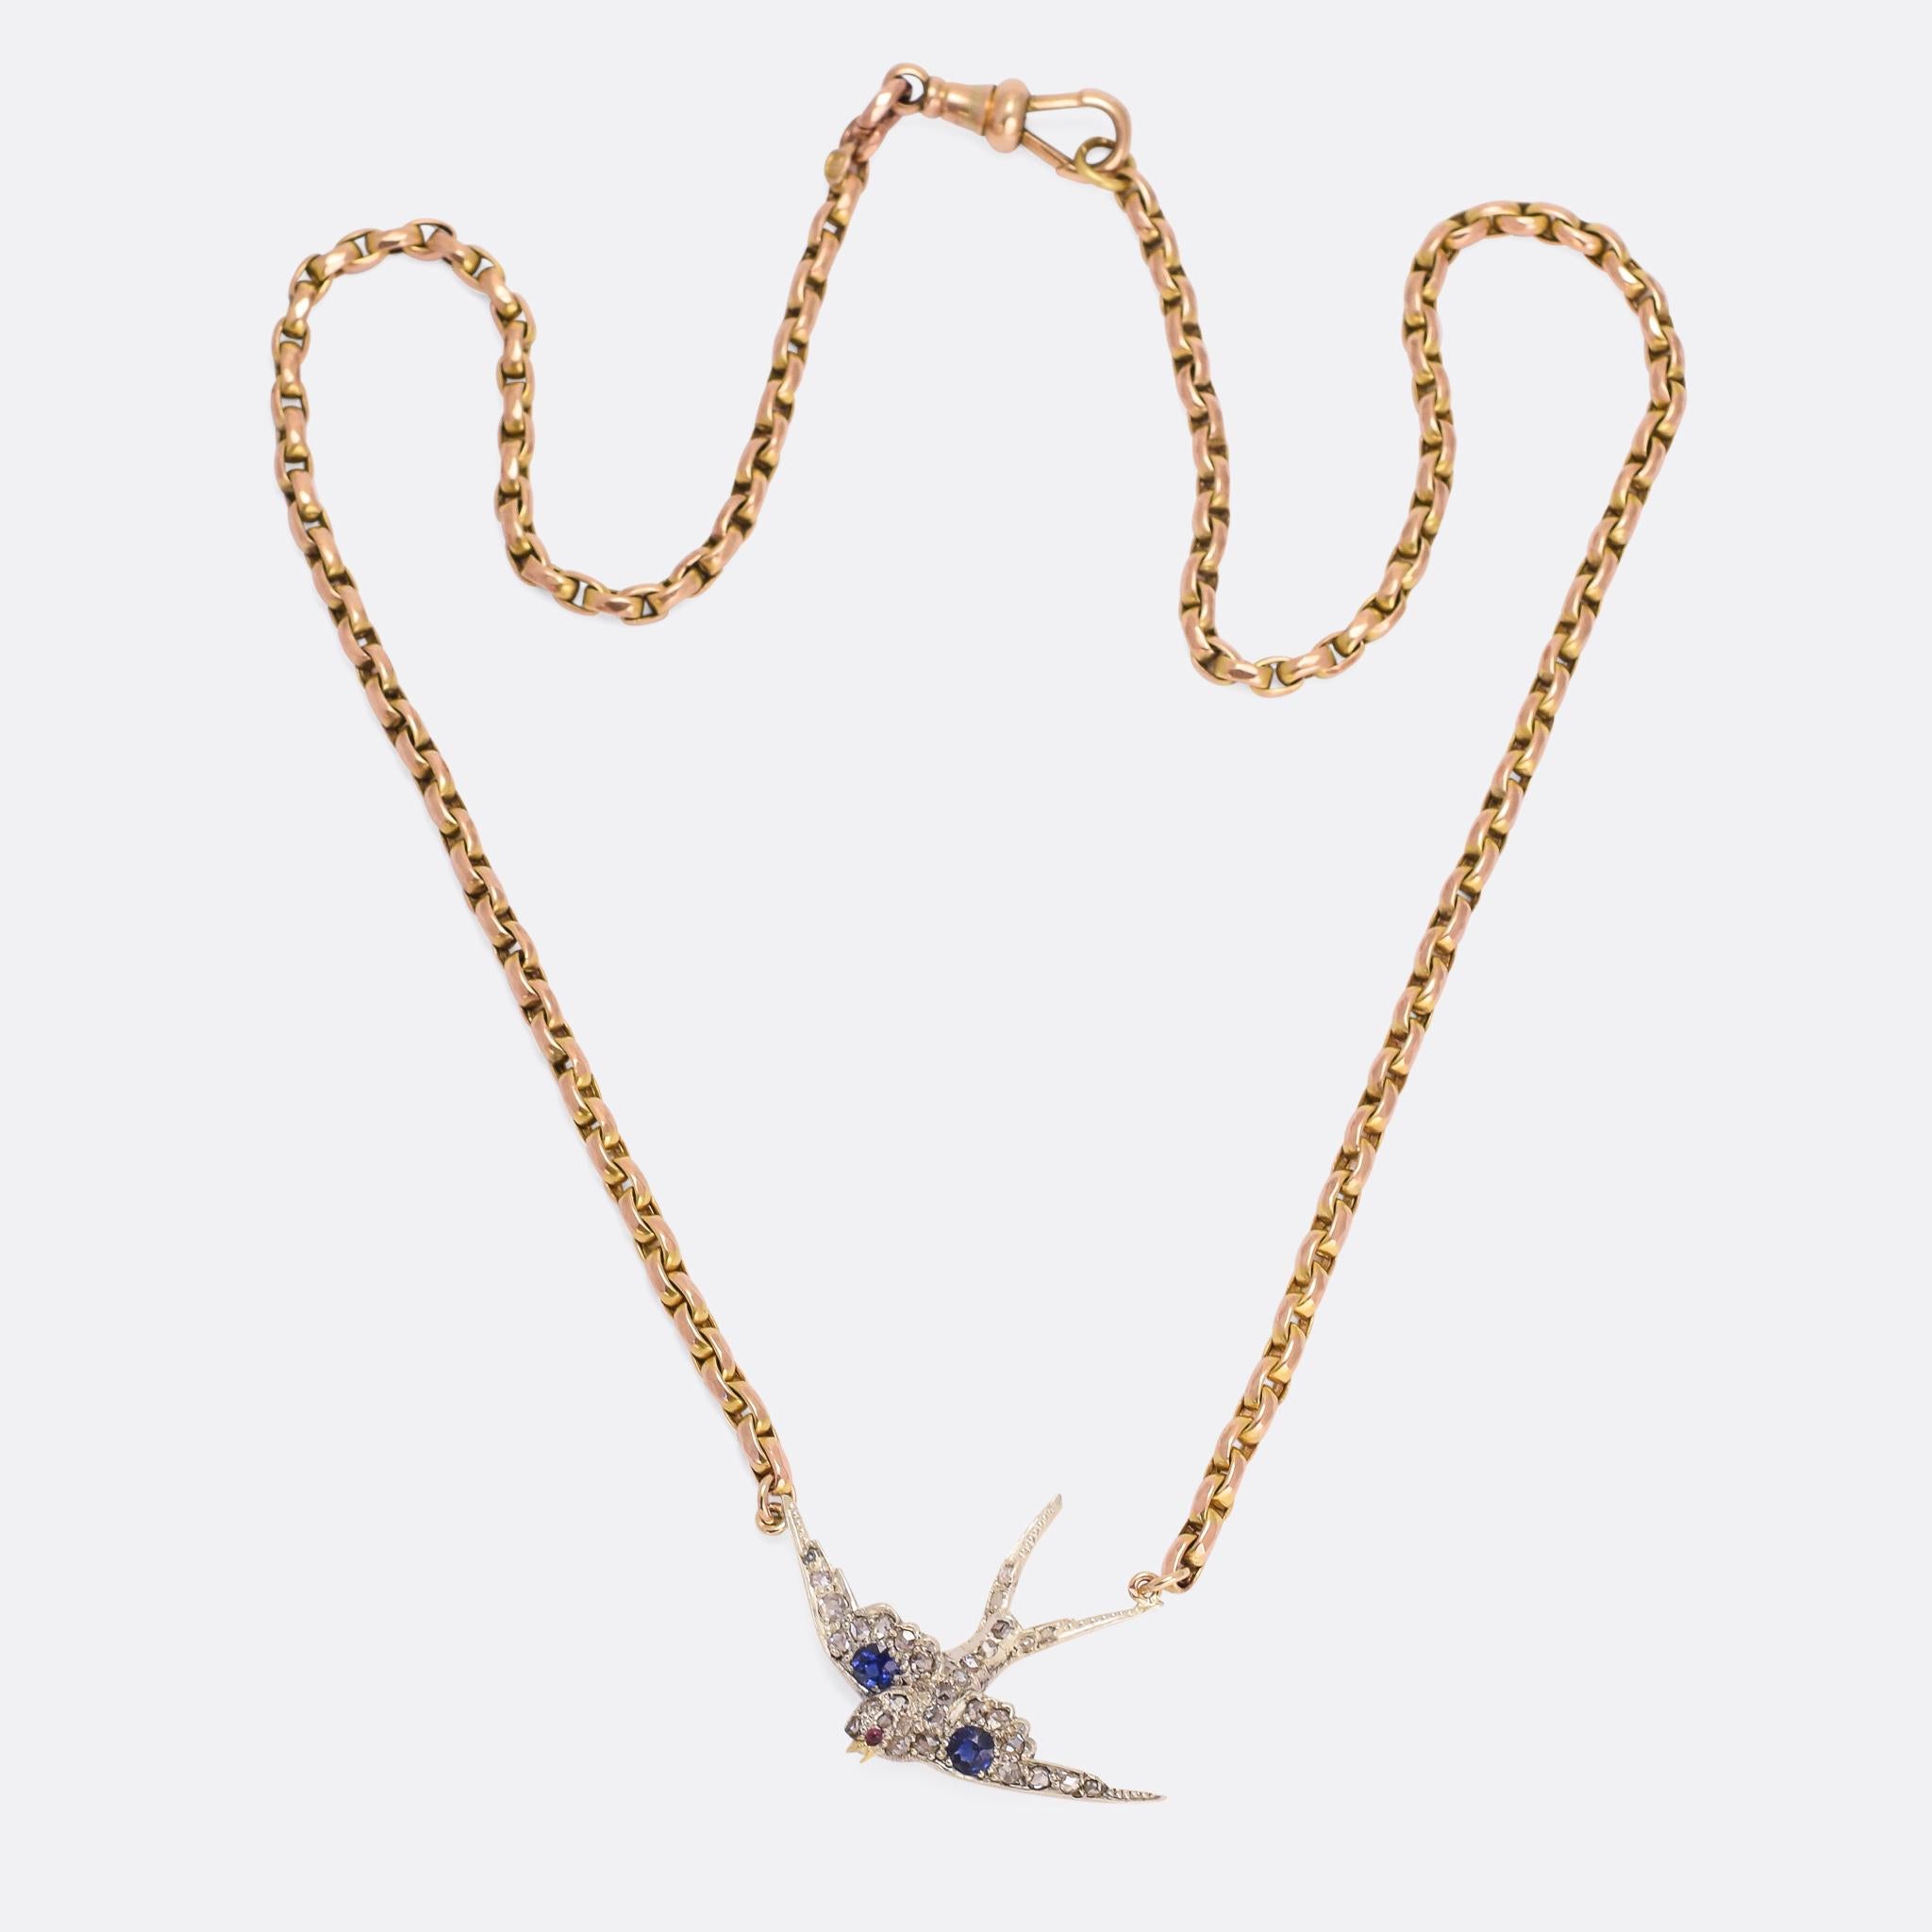 A stunning antique diving swallow necklace; the bird is set with diamonds, sapphires, and a ruby eye, modelled in 15k gold with silver settings. We've added a period gold chain, converting what was once a brooch into a very wearable necklace. 

The